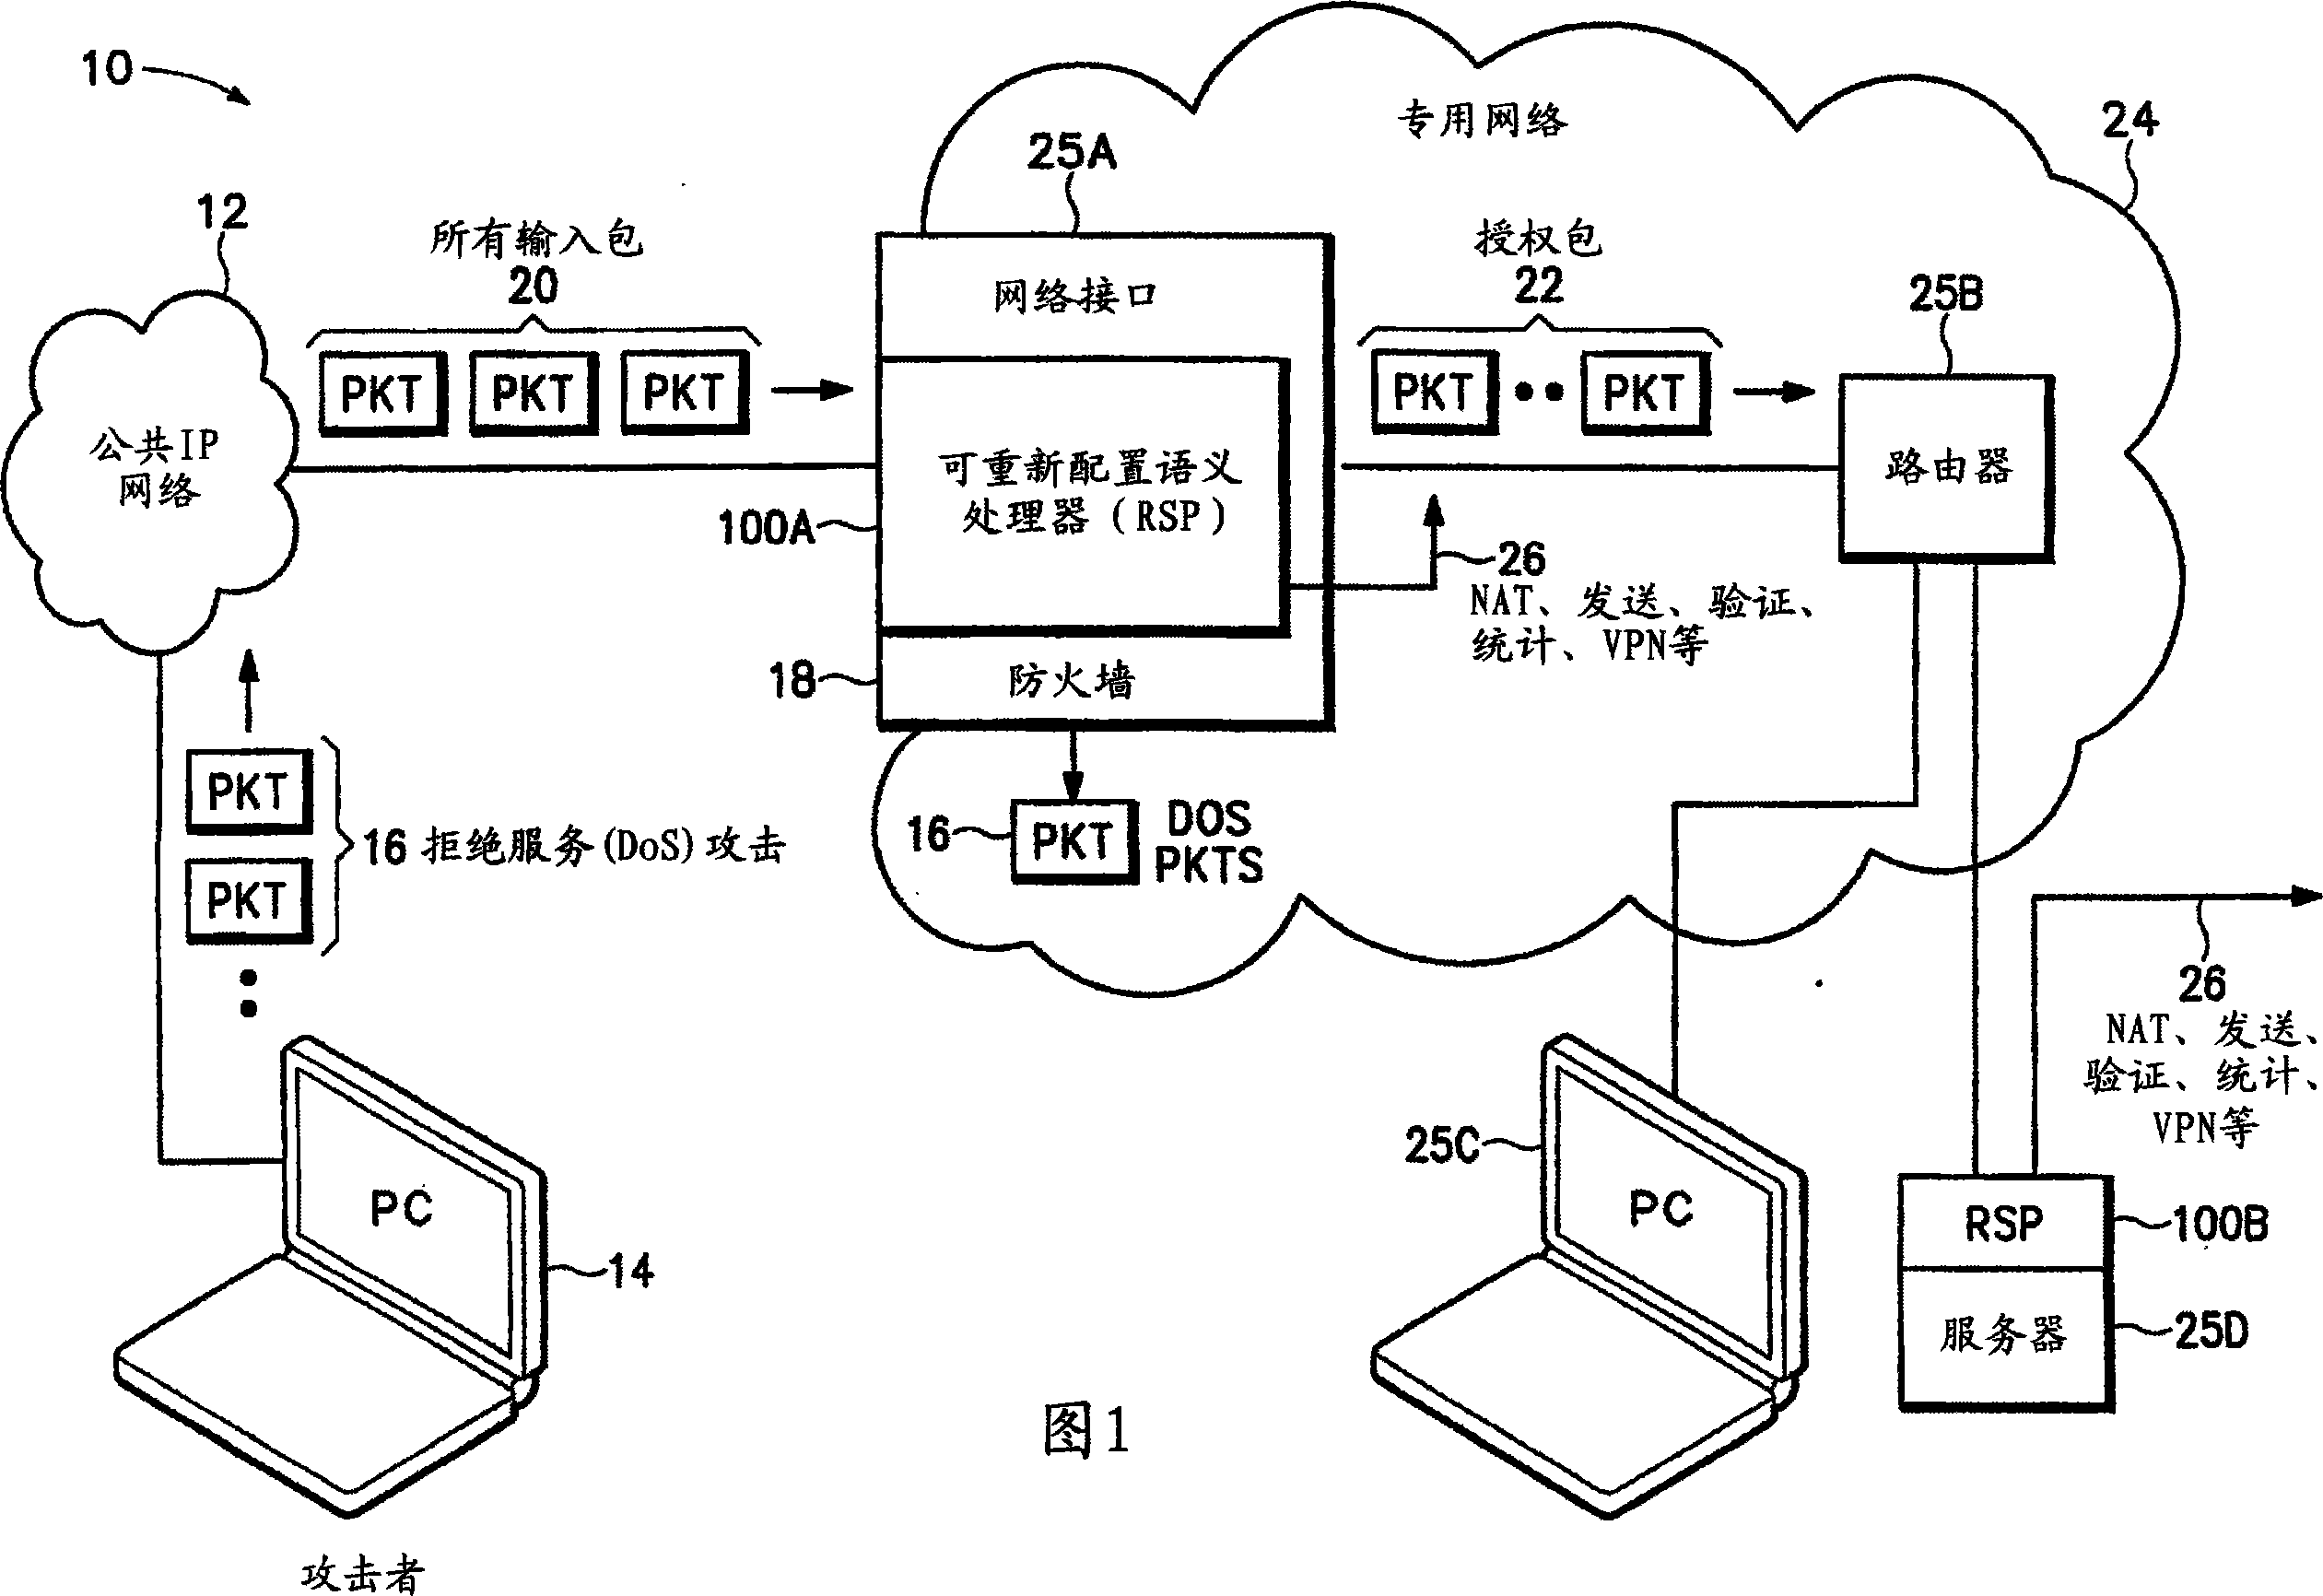 Network interface and firewall device